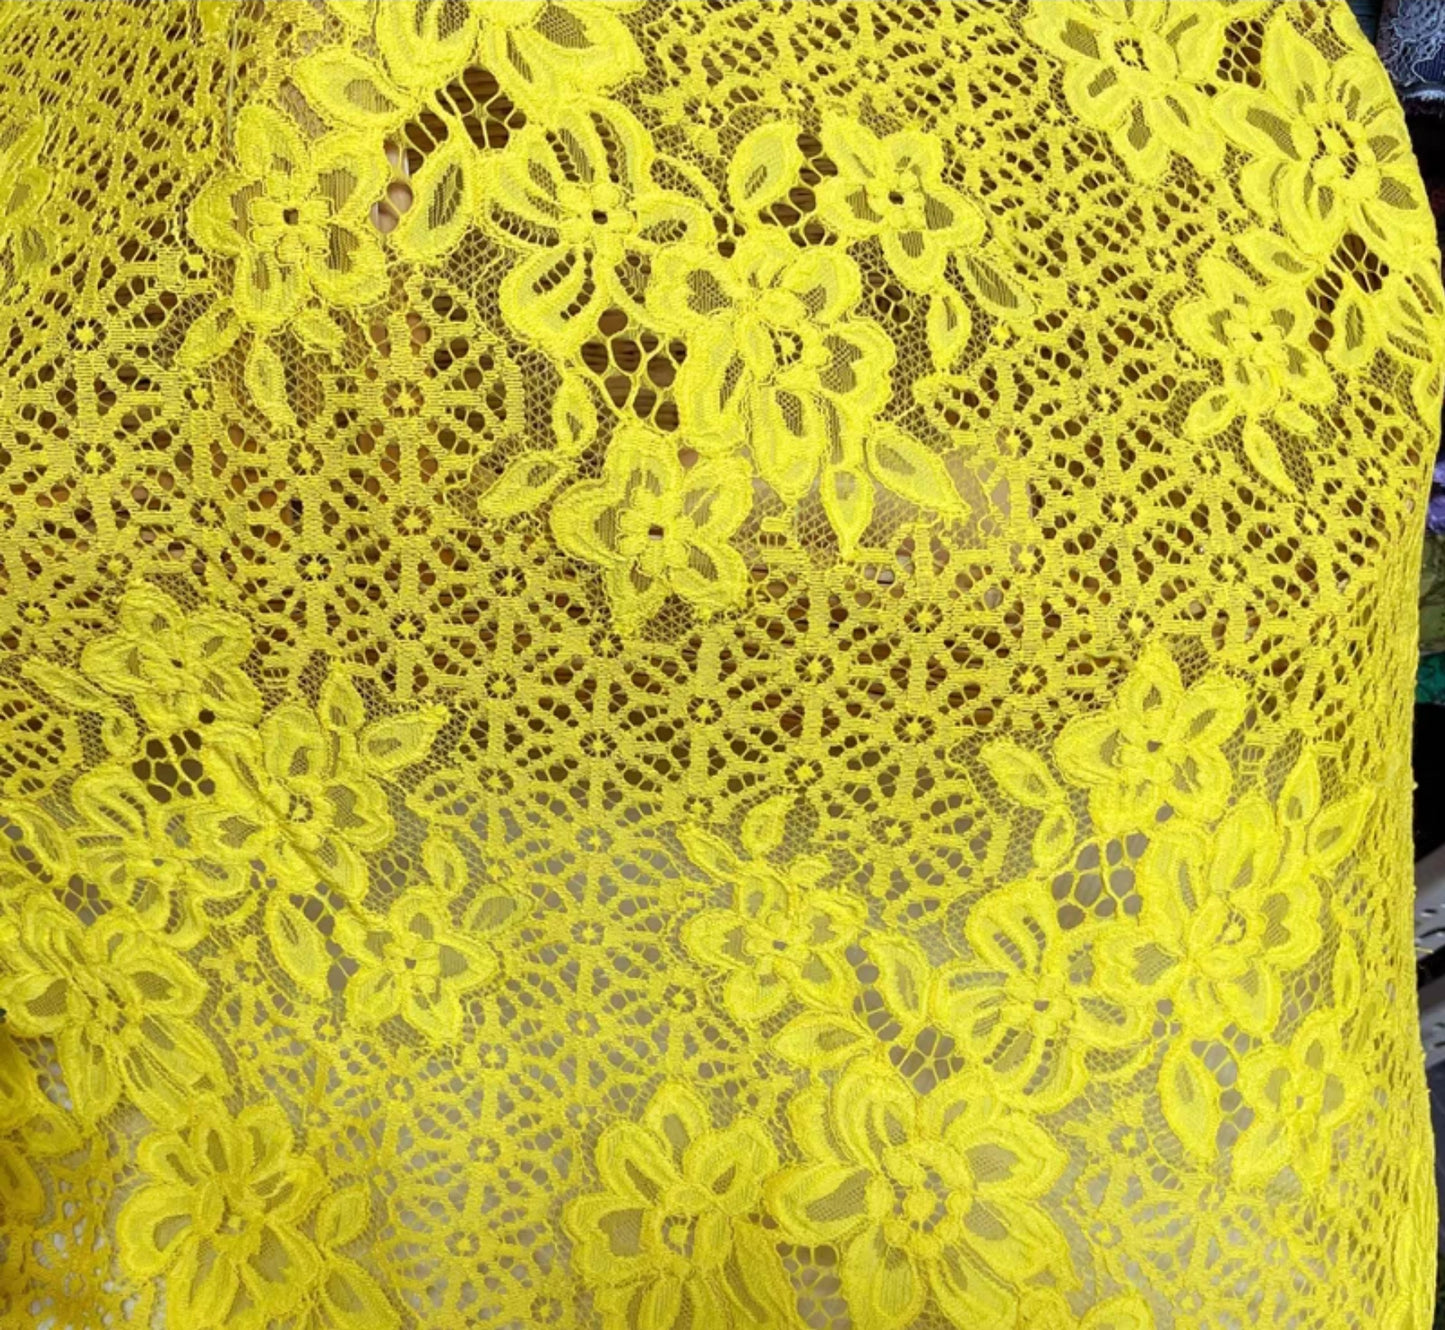 Lace fabric printing 3001-001